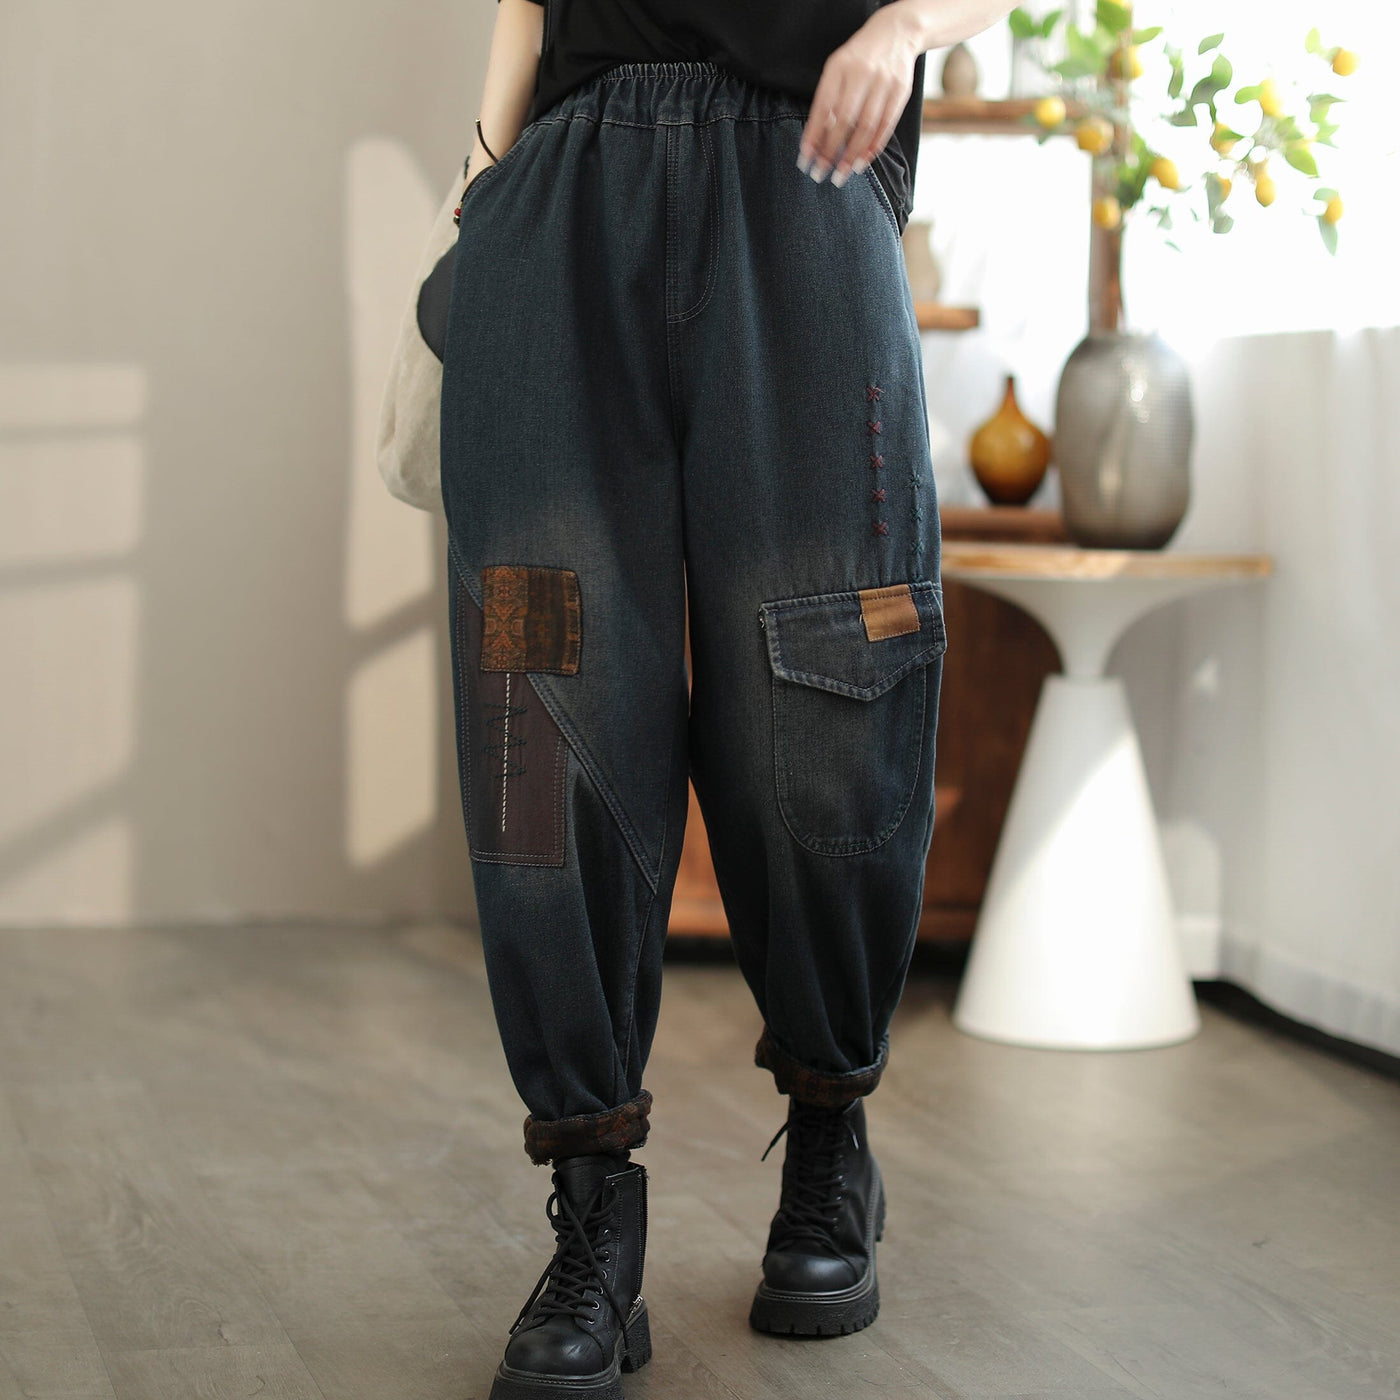 Women Fashion Patchwork Furred Winter Jeans